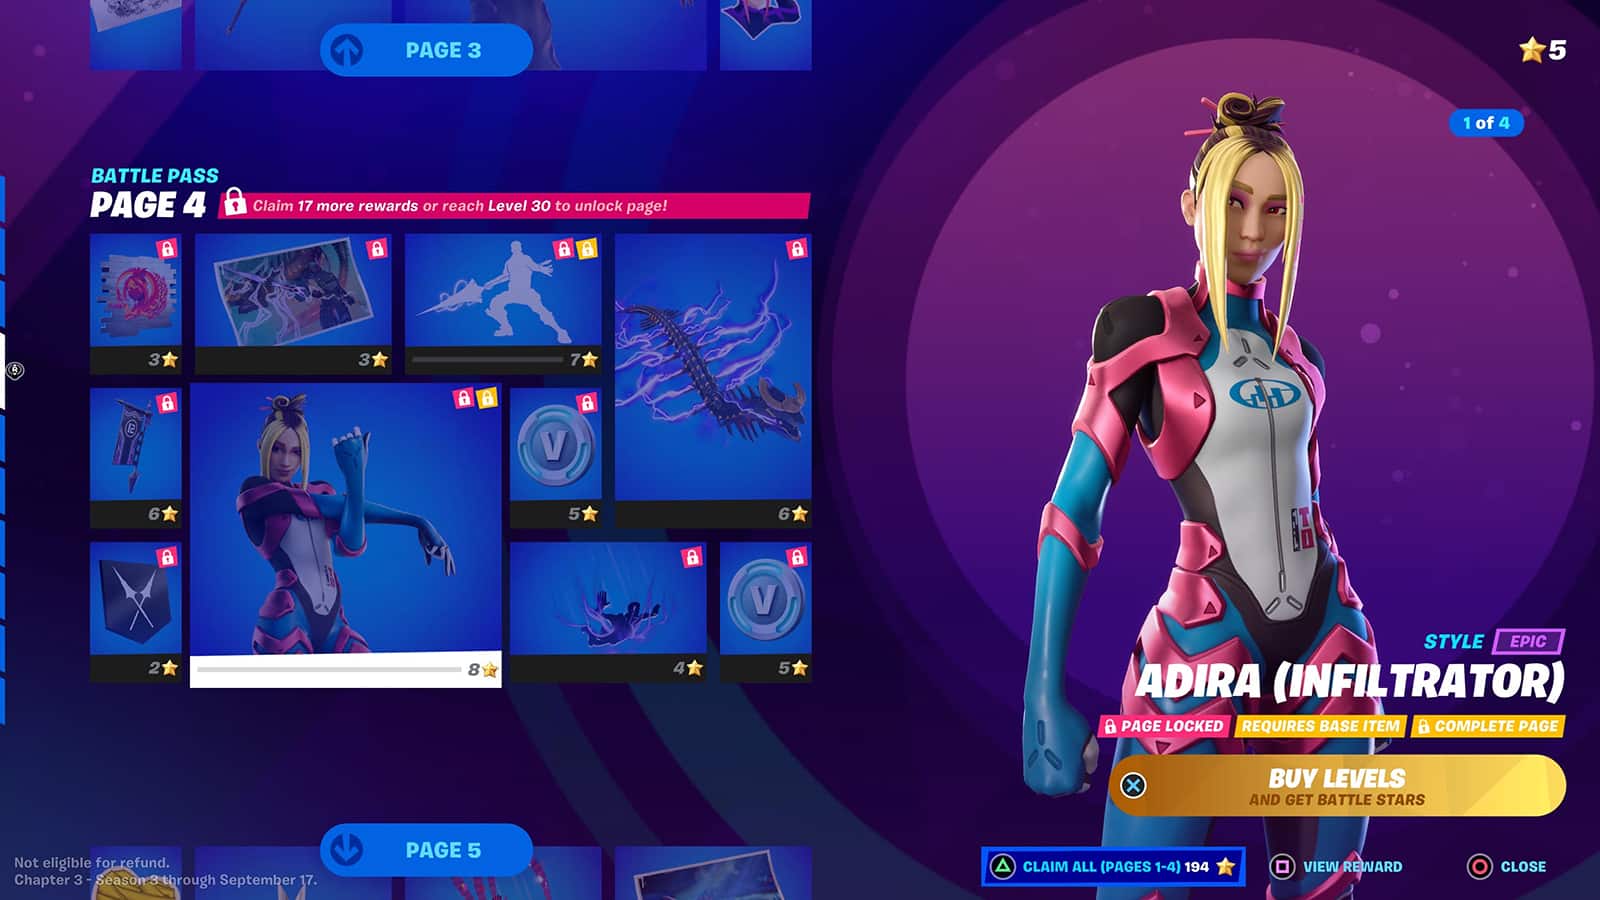 Fortnite Battle Pass page 4